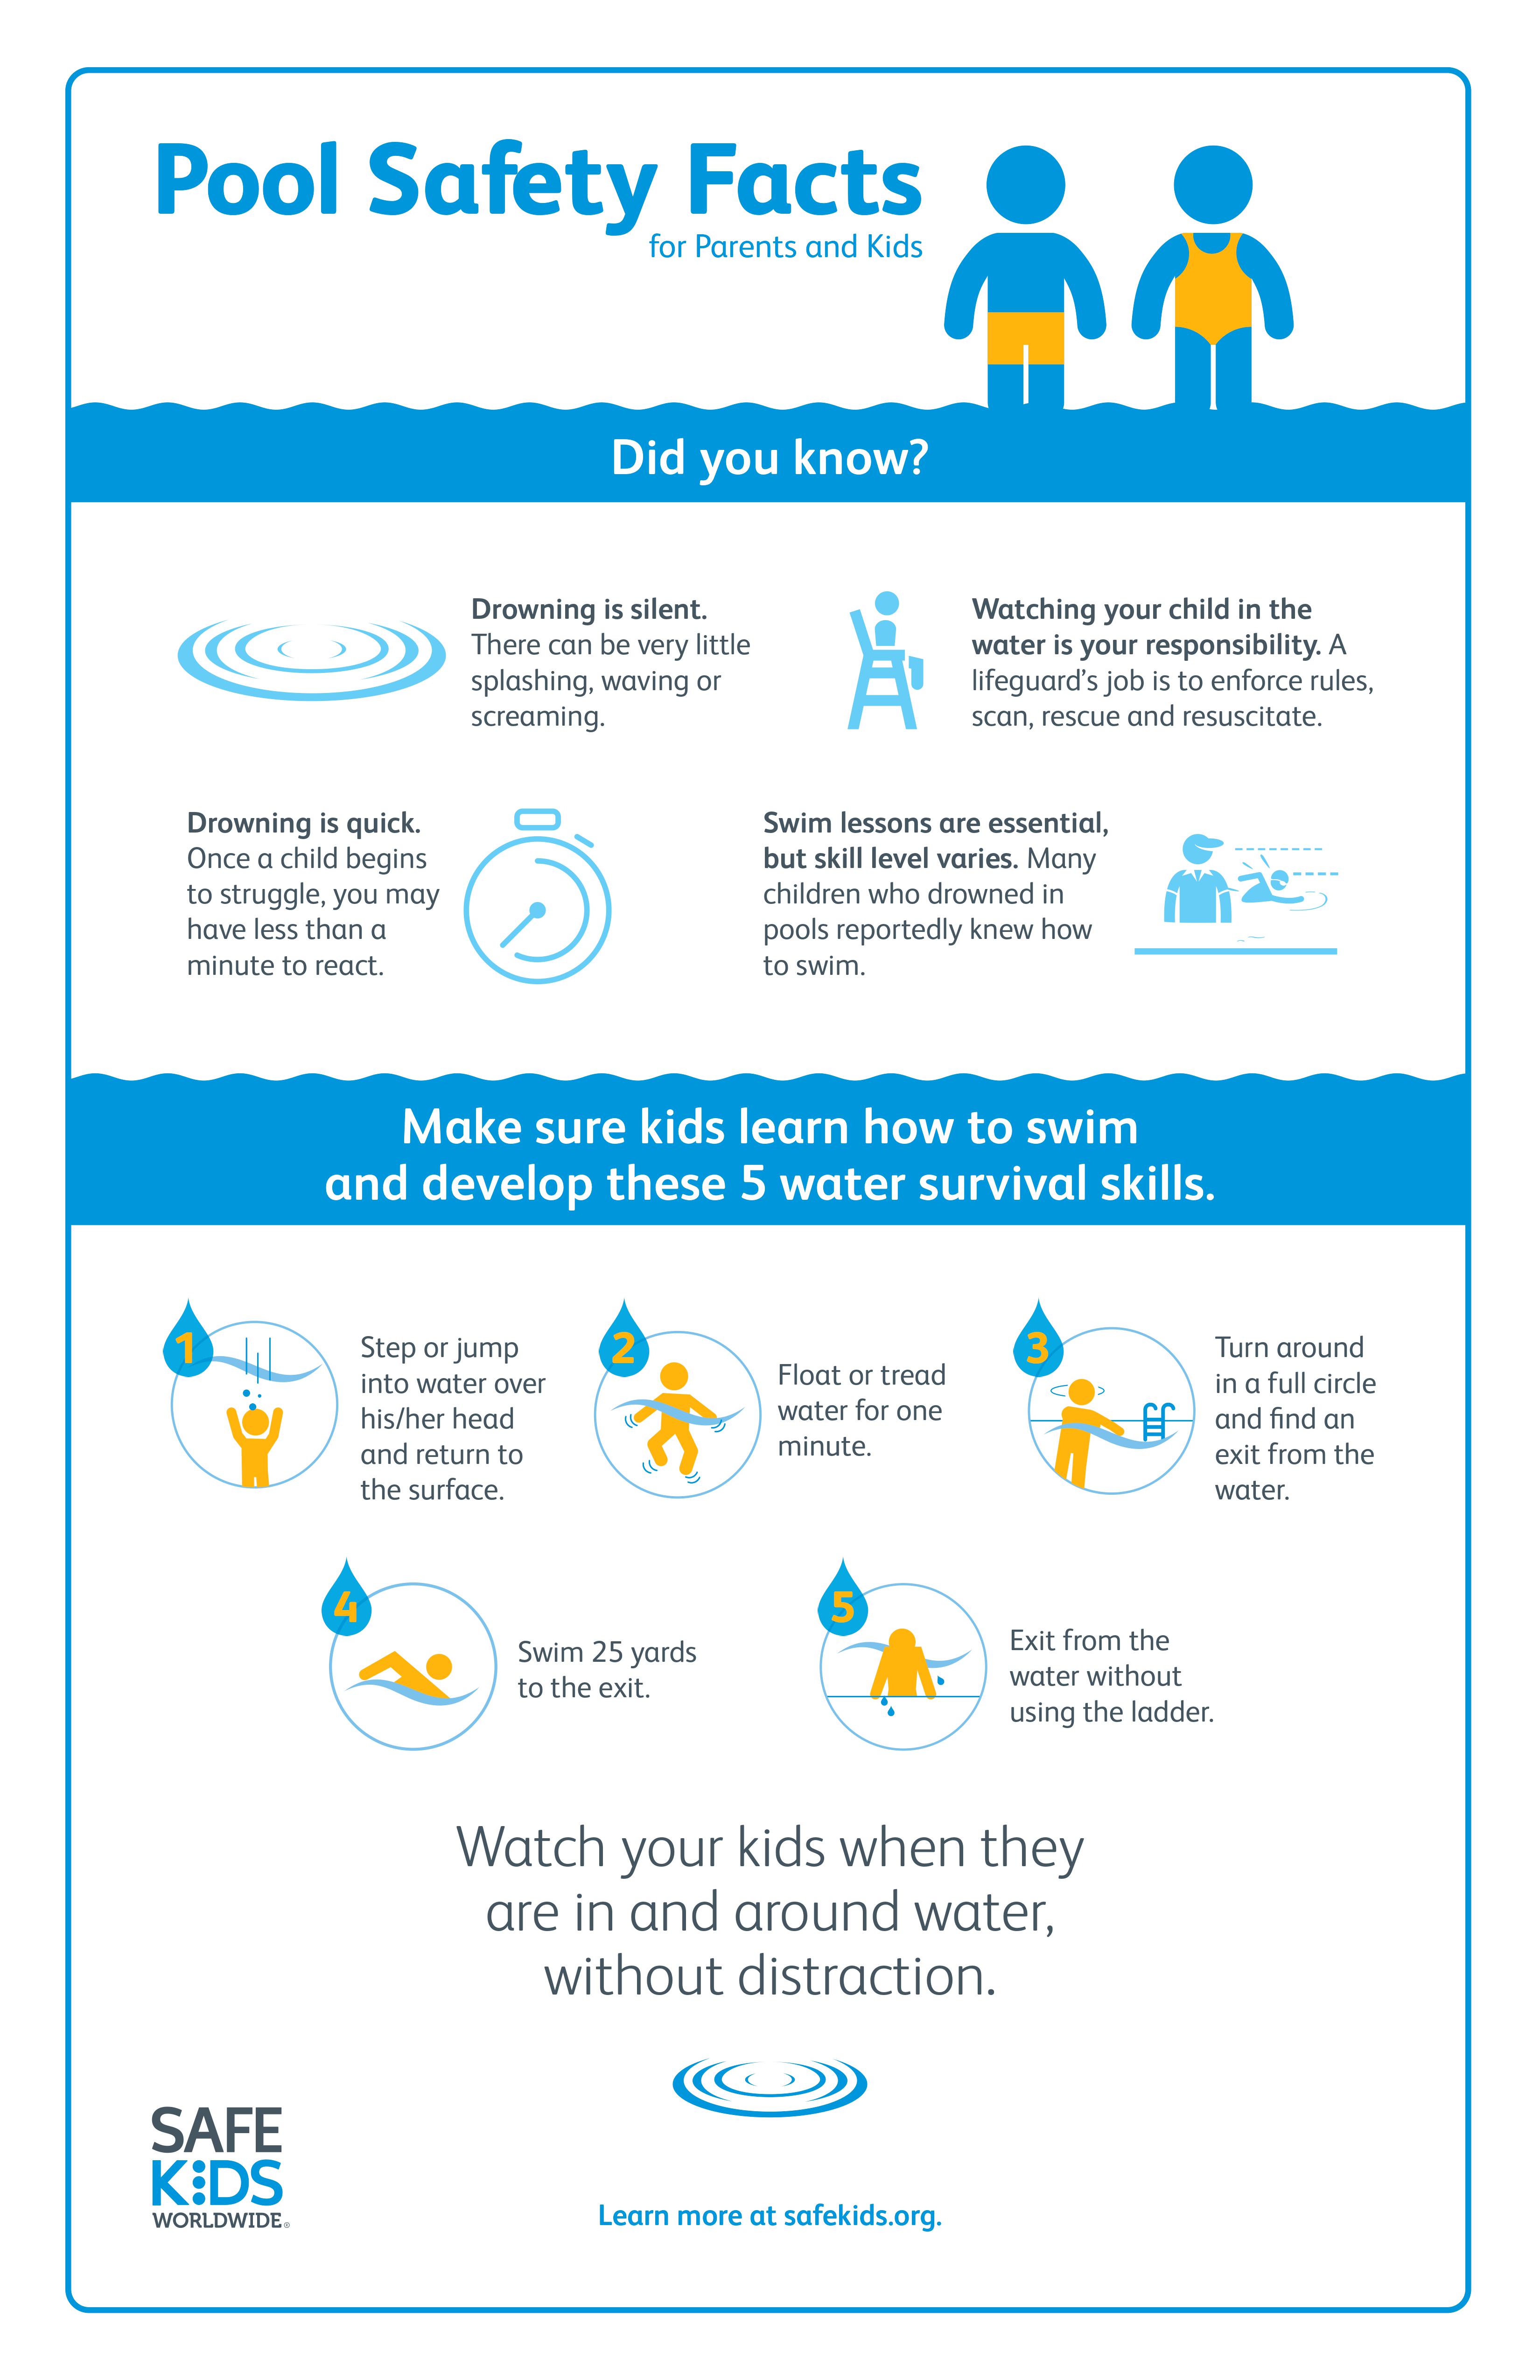 How Do I Keep My Kids Safe at a Pool Party?